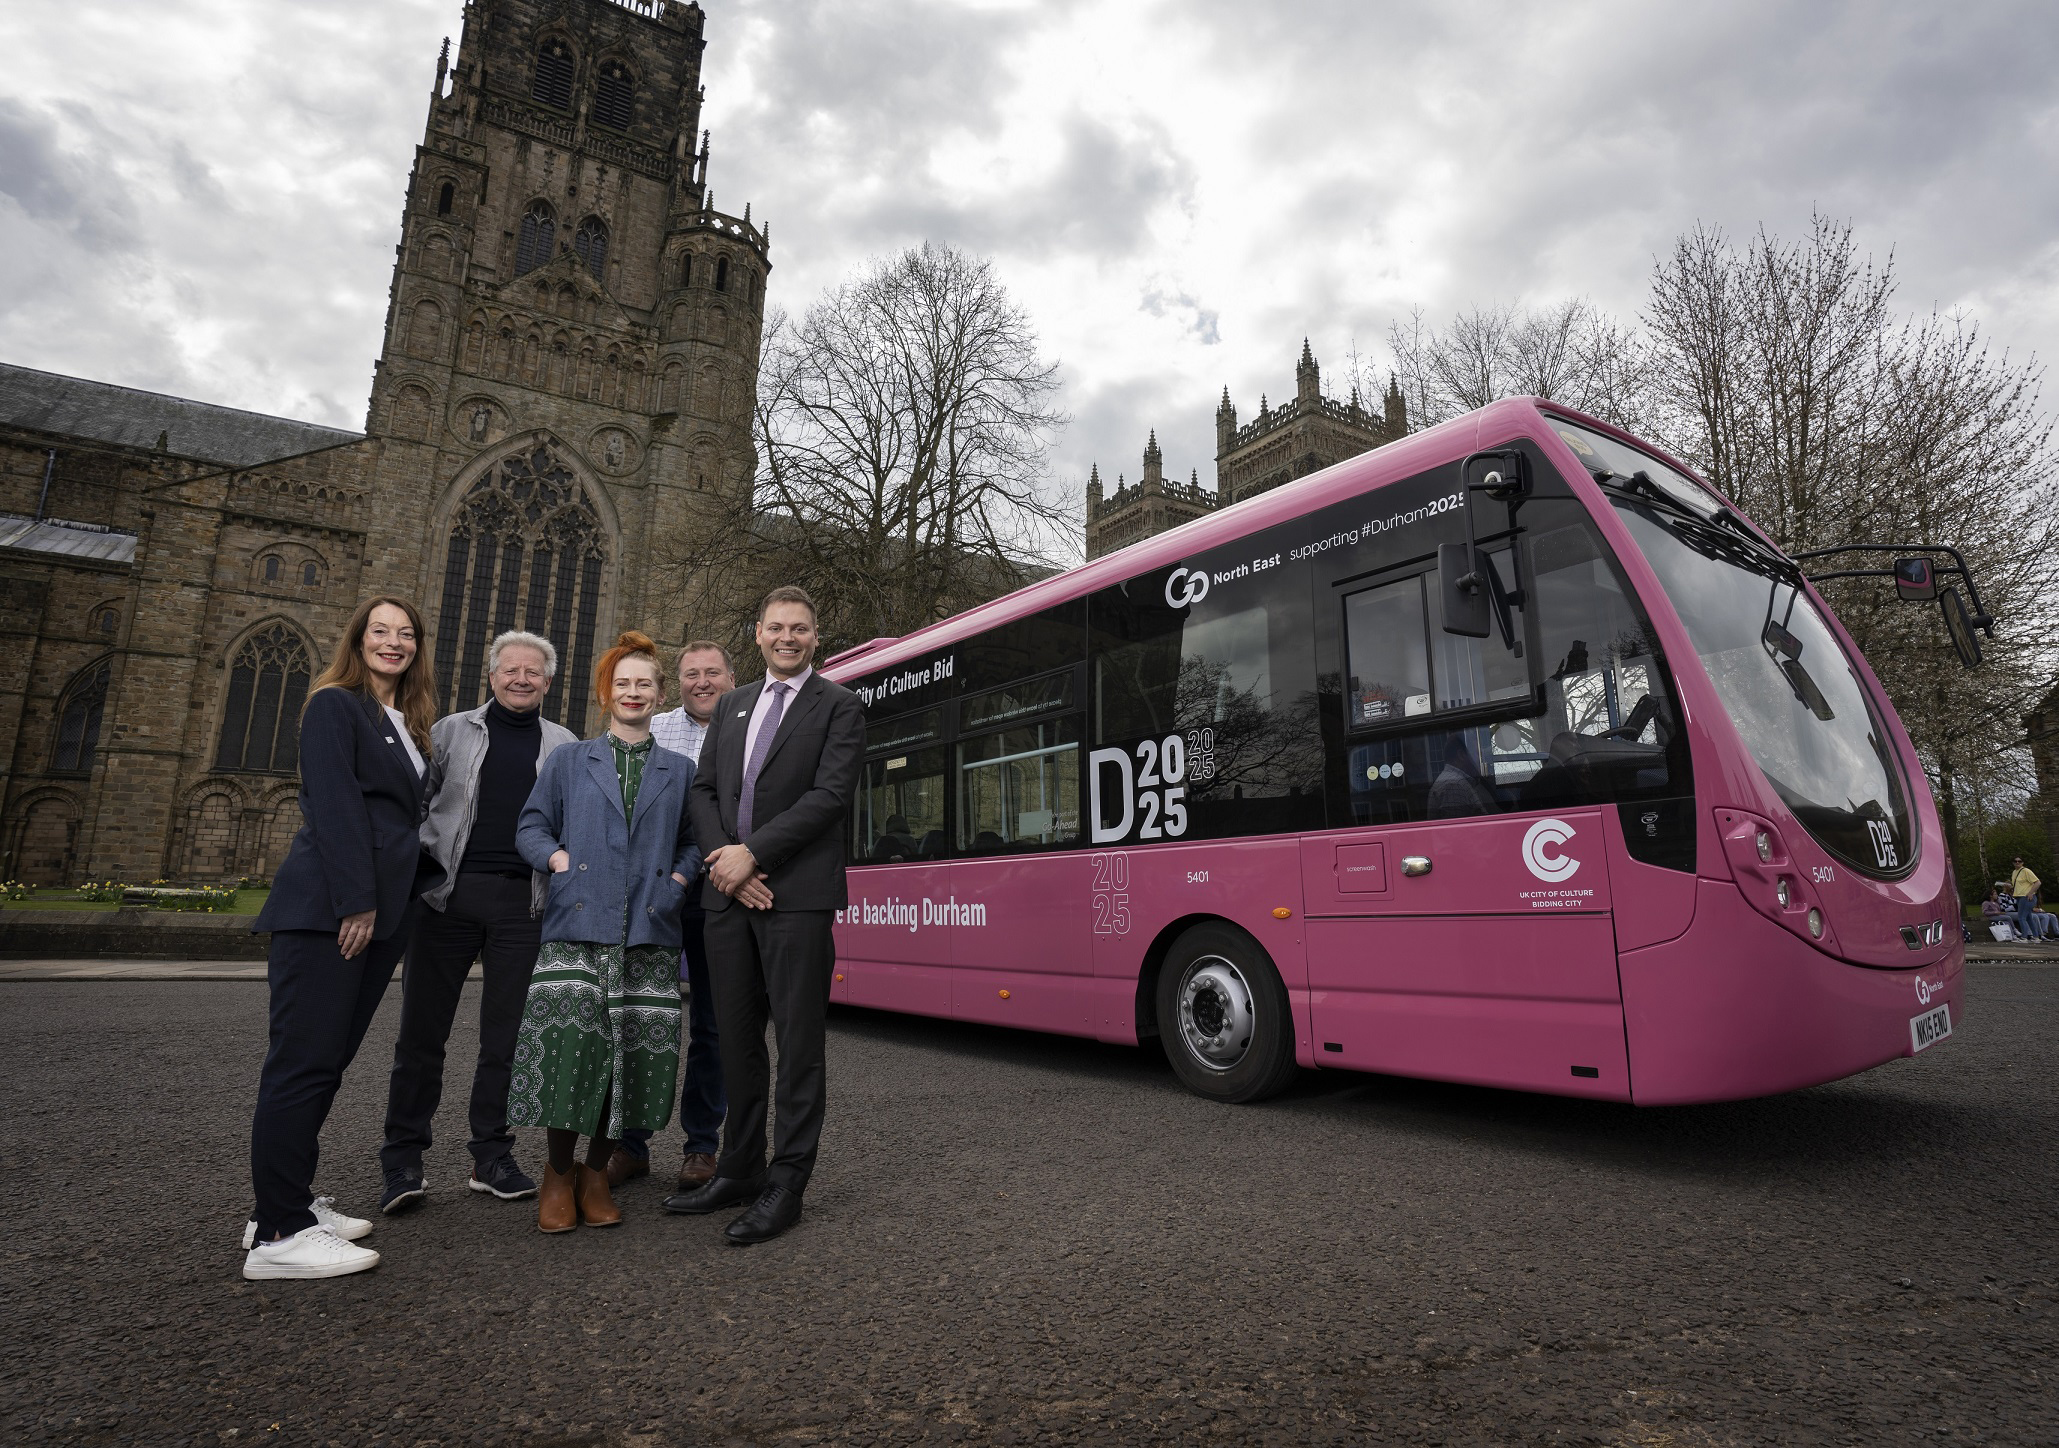 businesses-get-on-board-county-durham-s-uk-city-of-culture-2025-bid